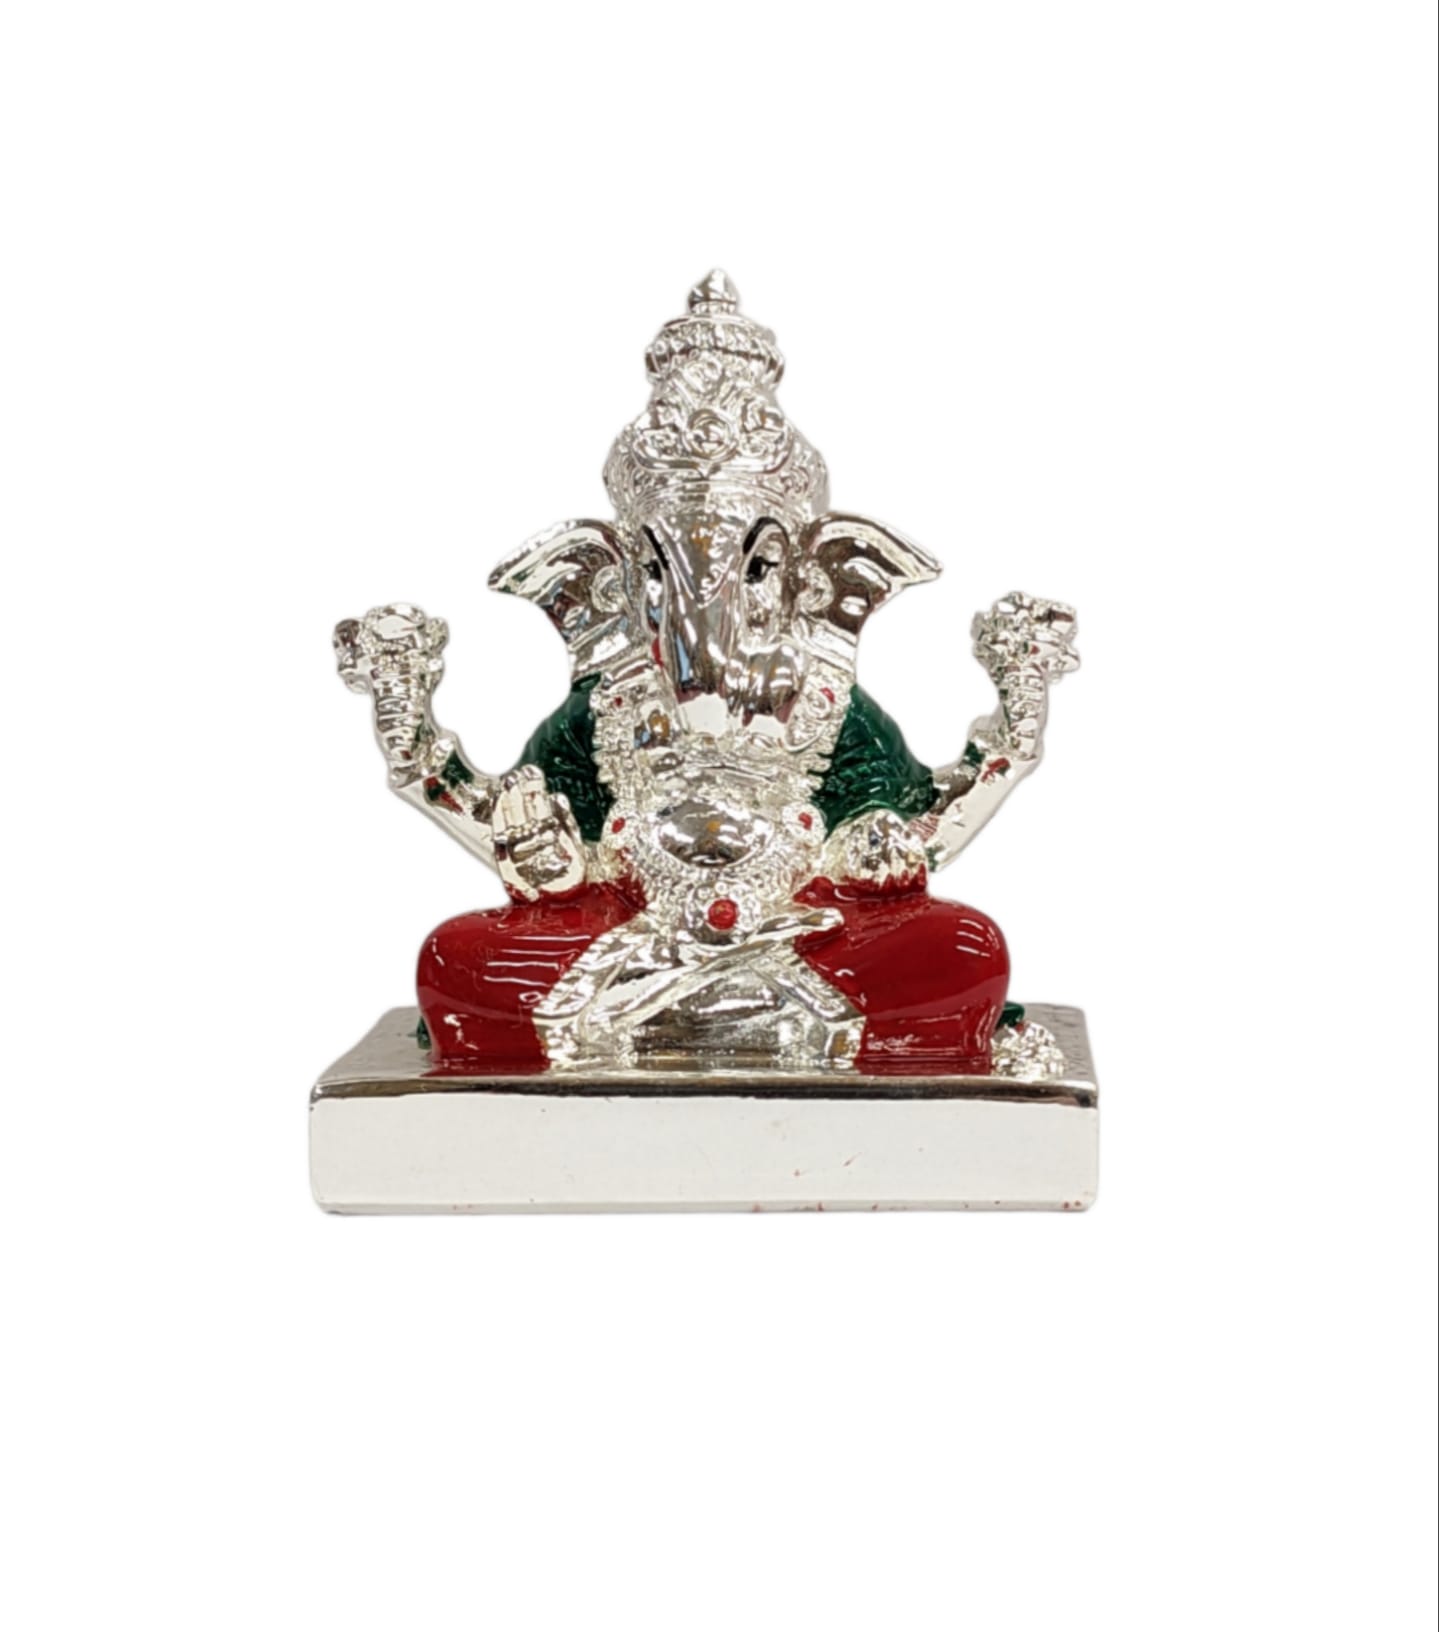 Image of a Pure Silver coated Ganesha Car Dashboard Idol for sale in Canada and US.